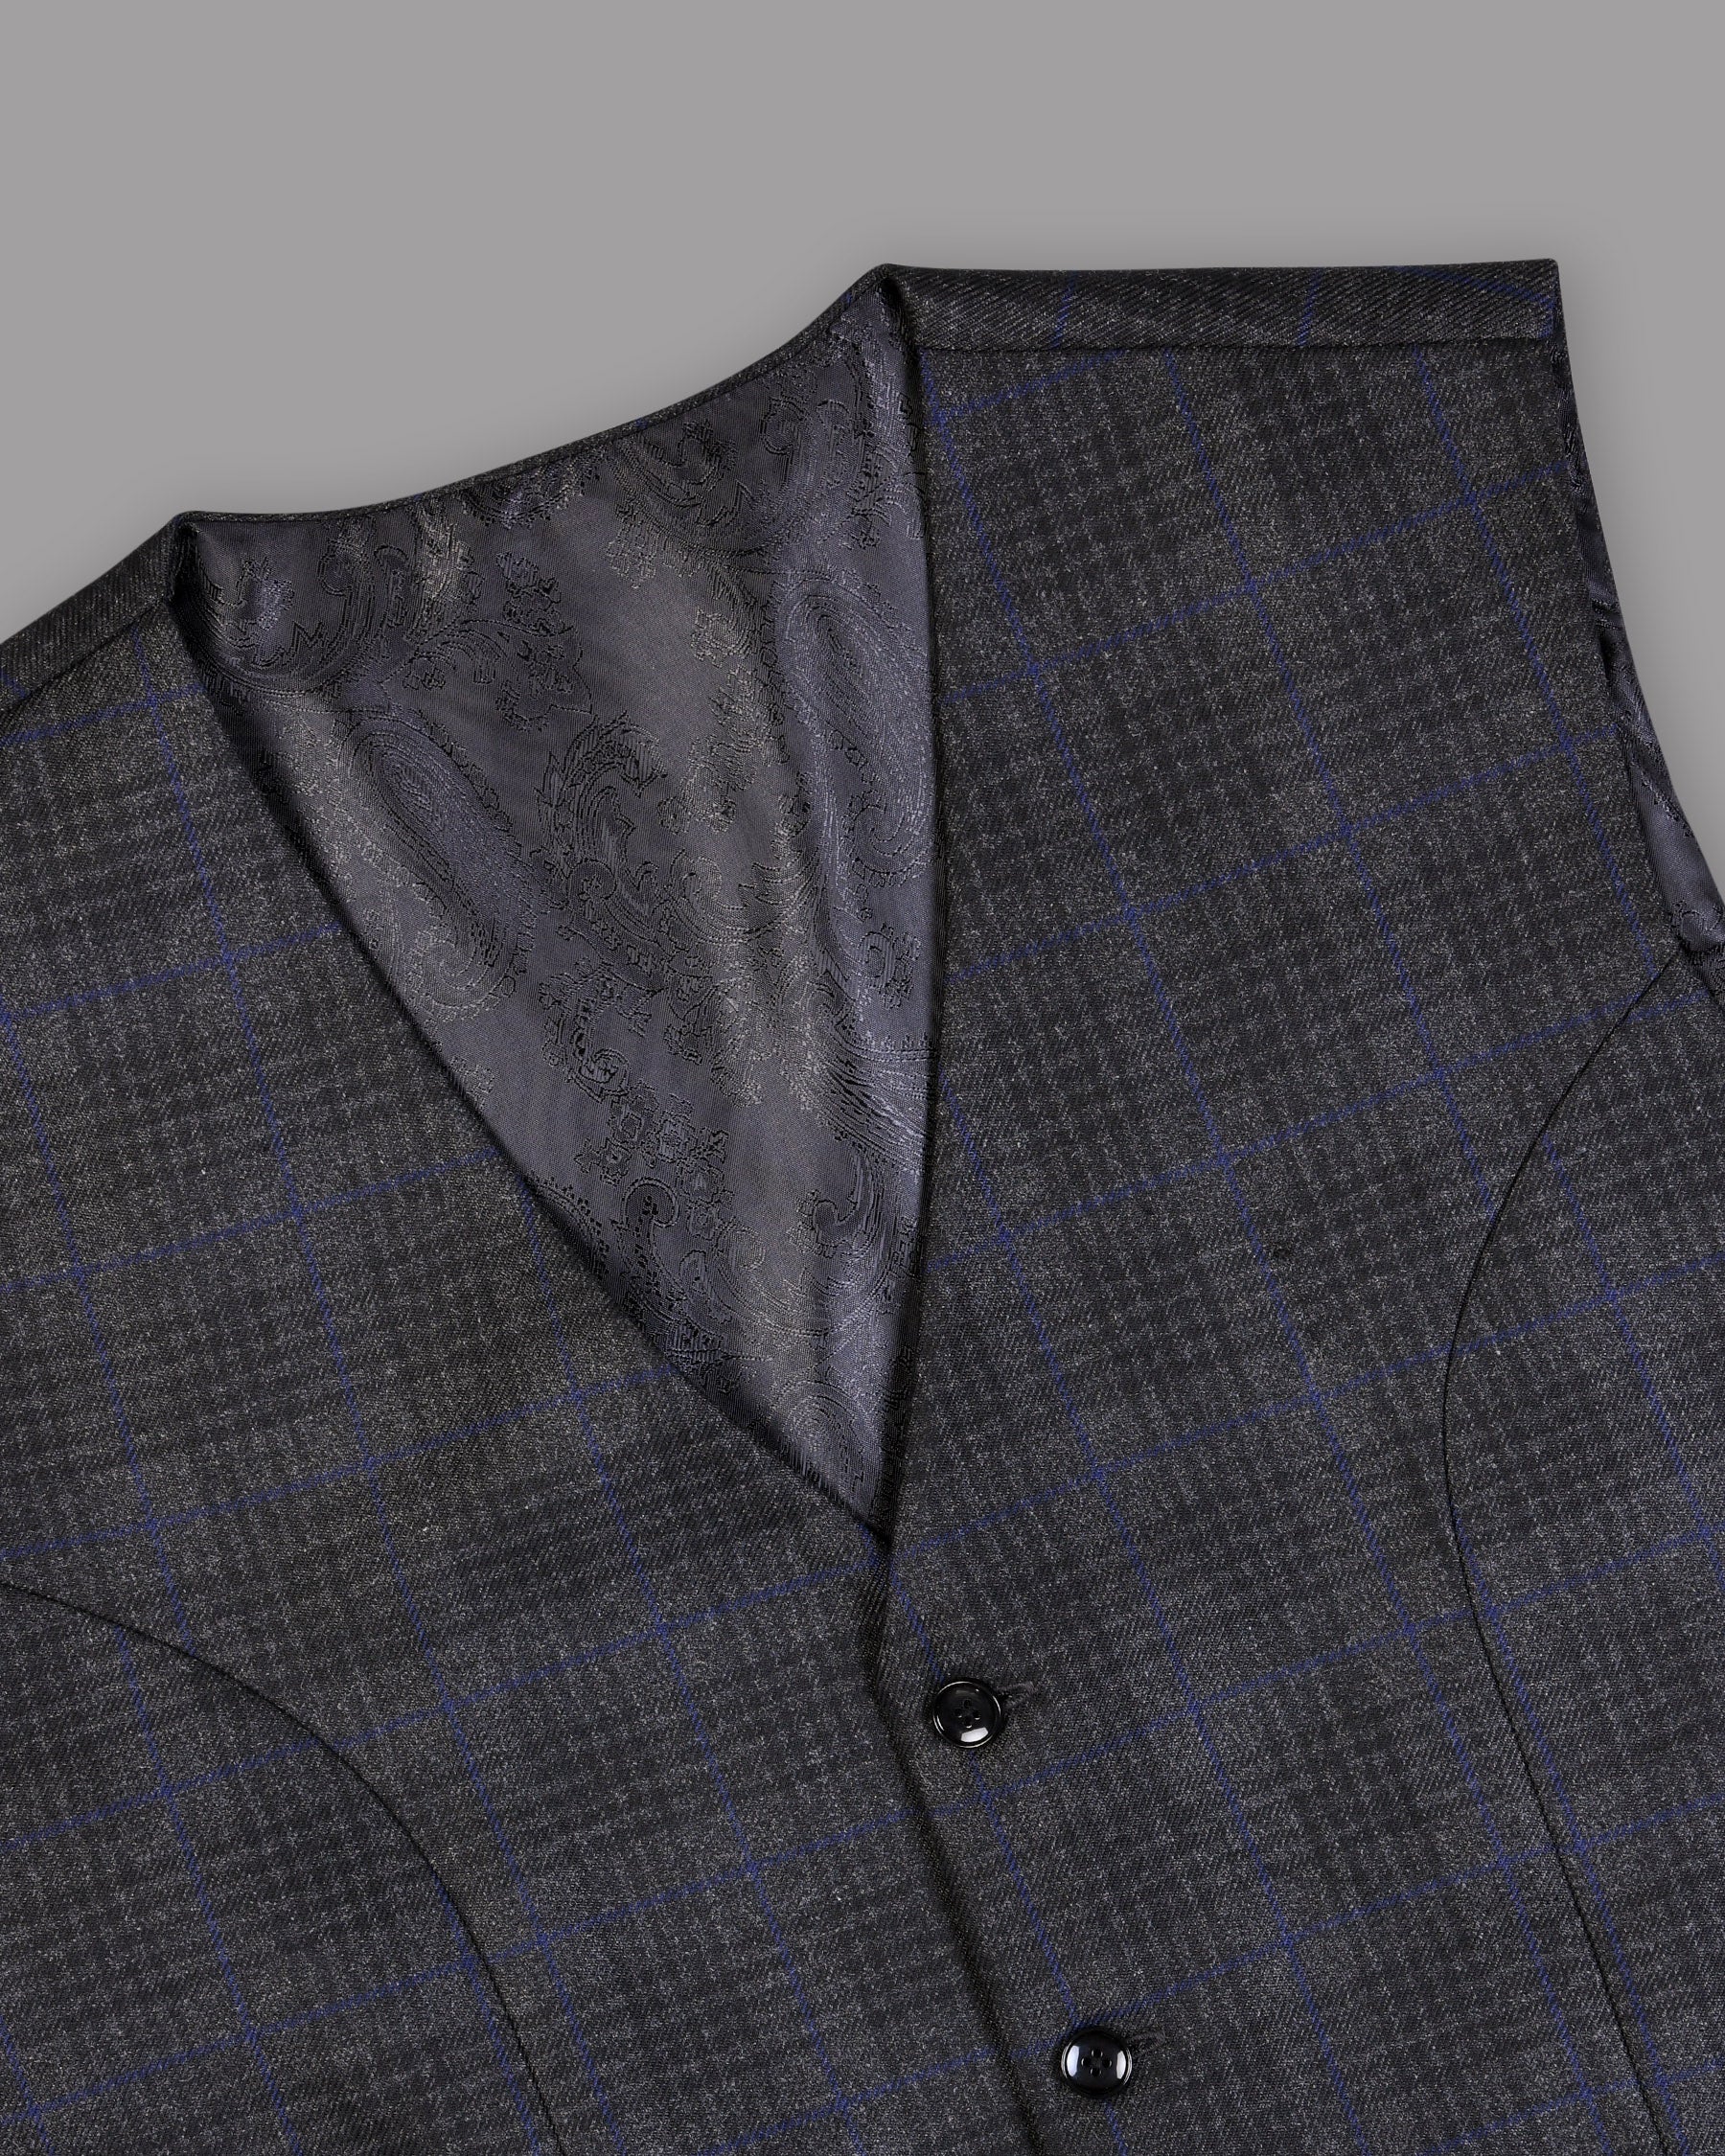 Shark Grey Plaid with Bunting Blue Windowpane Wool Rich Suit